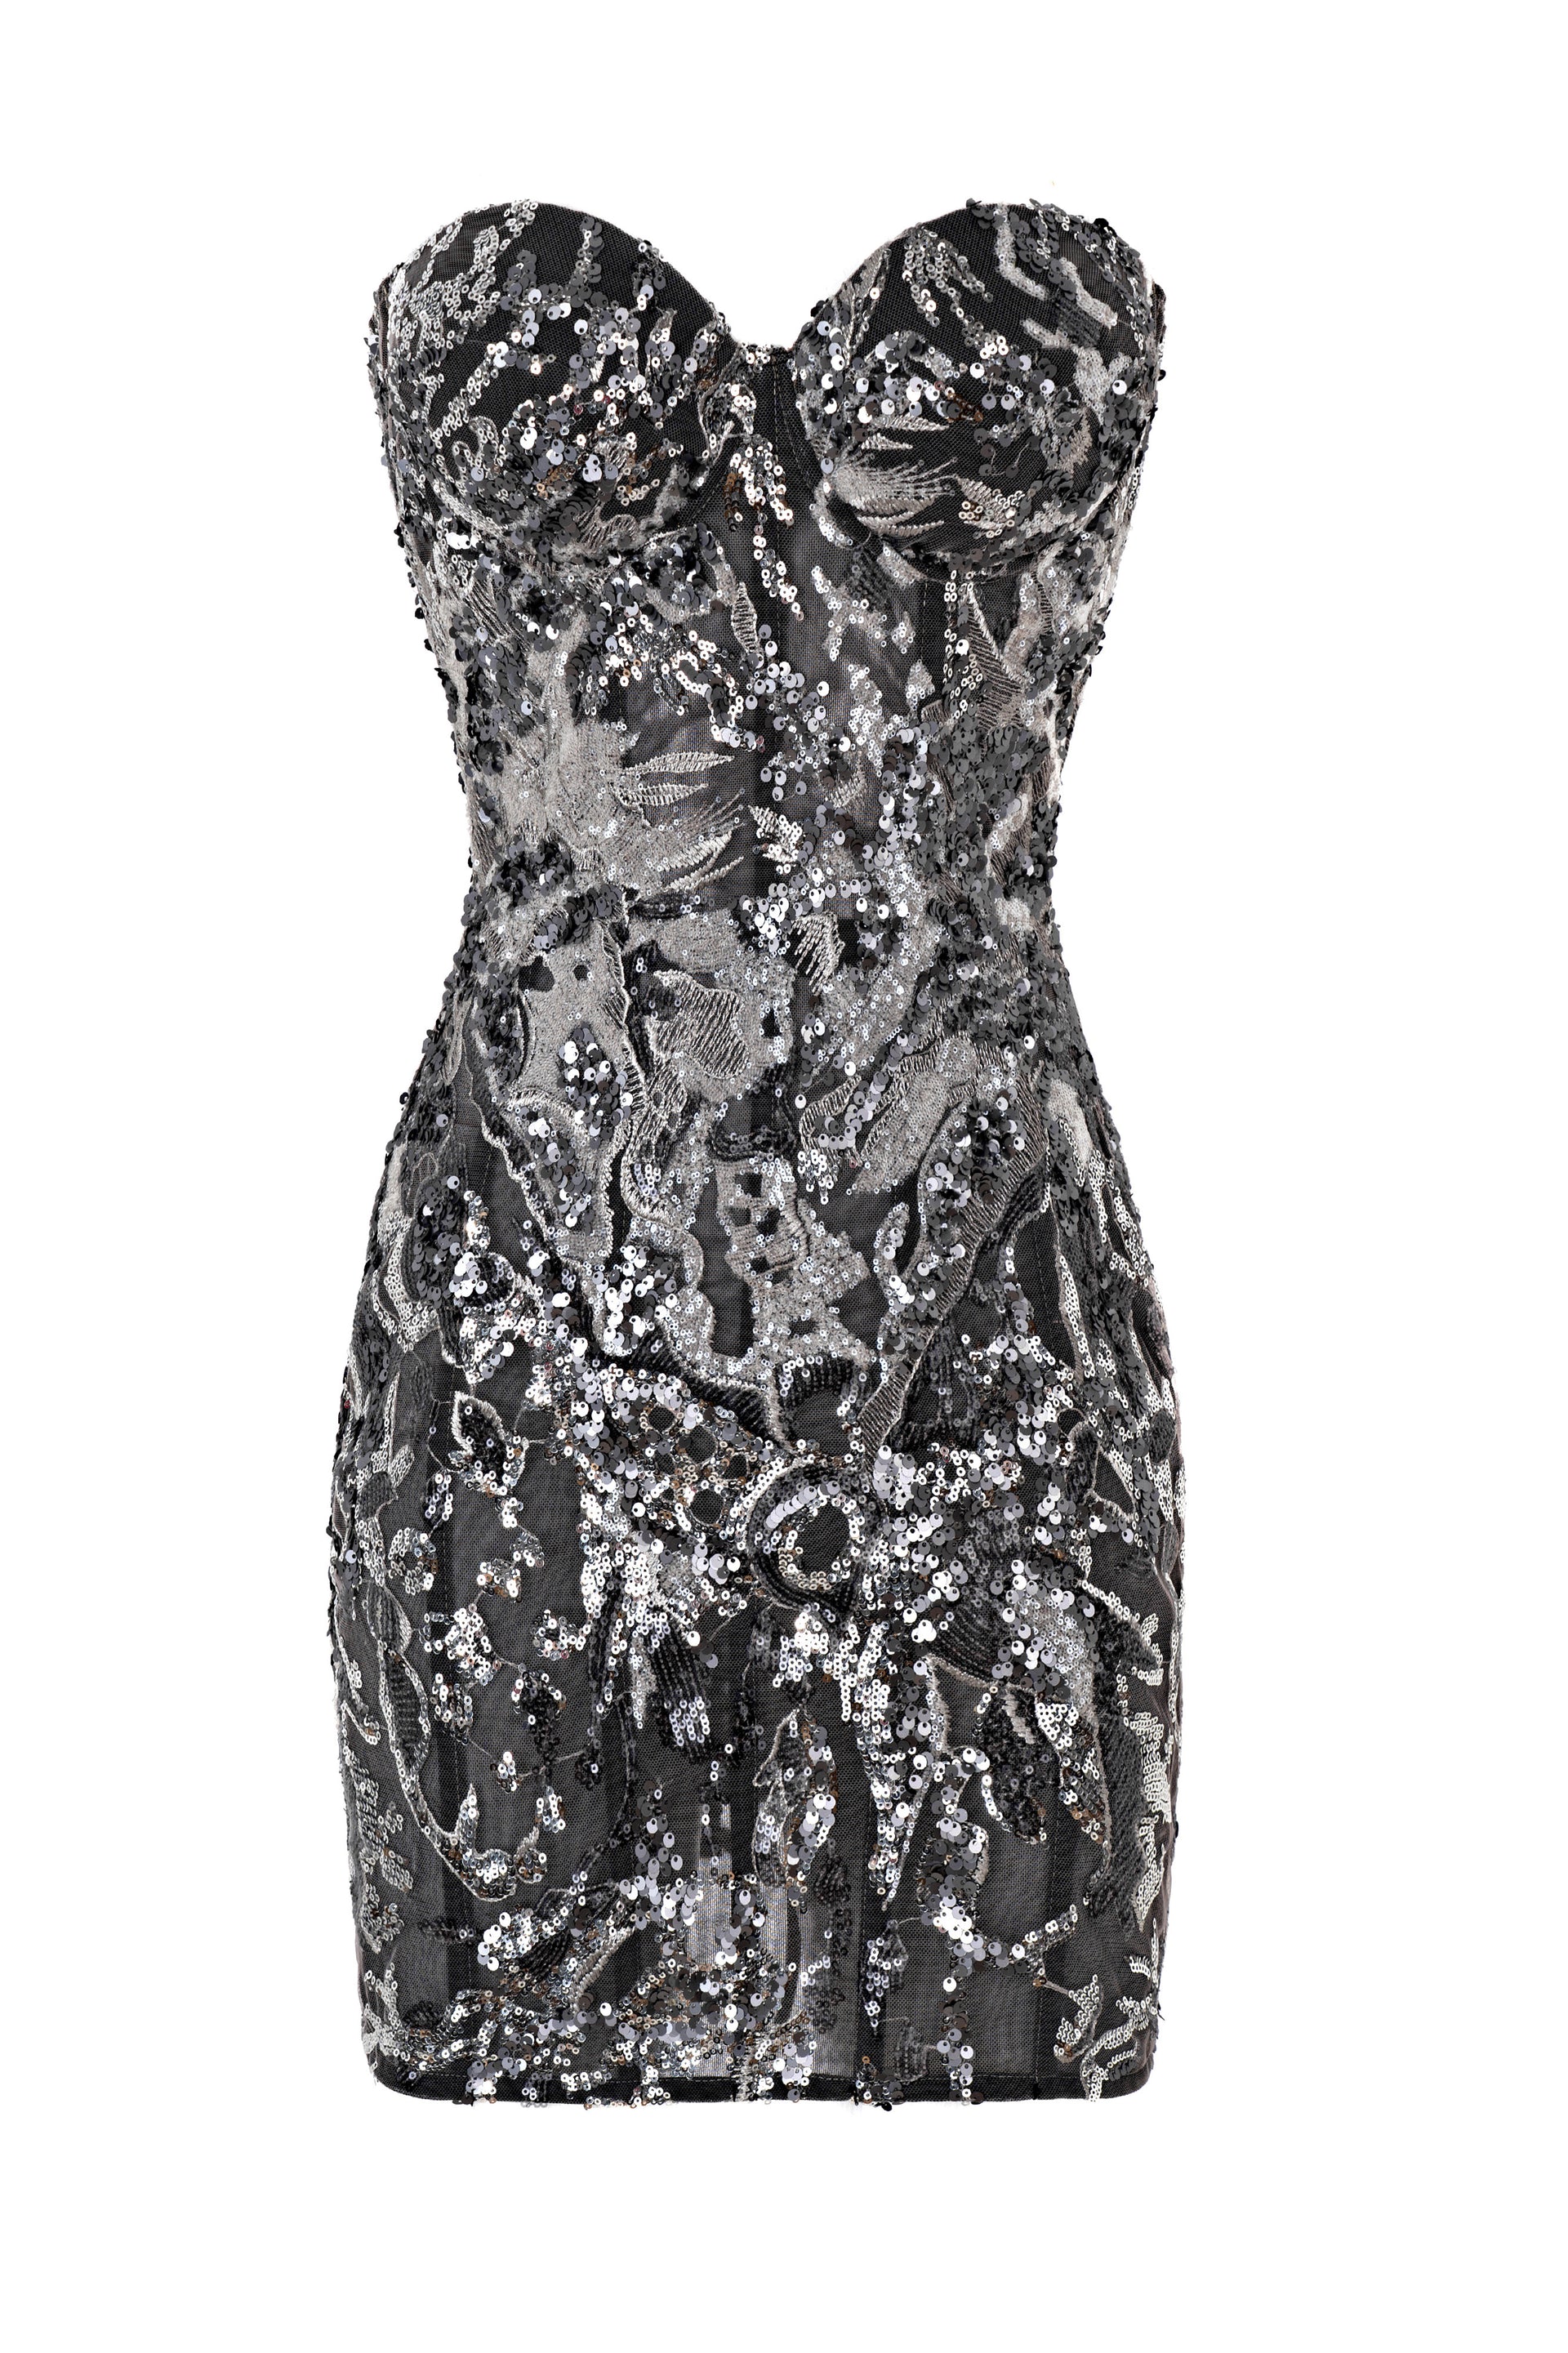 Shiny grey corset dress with cups